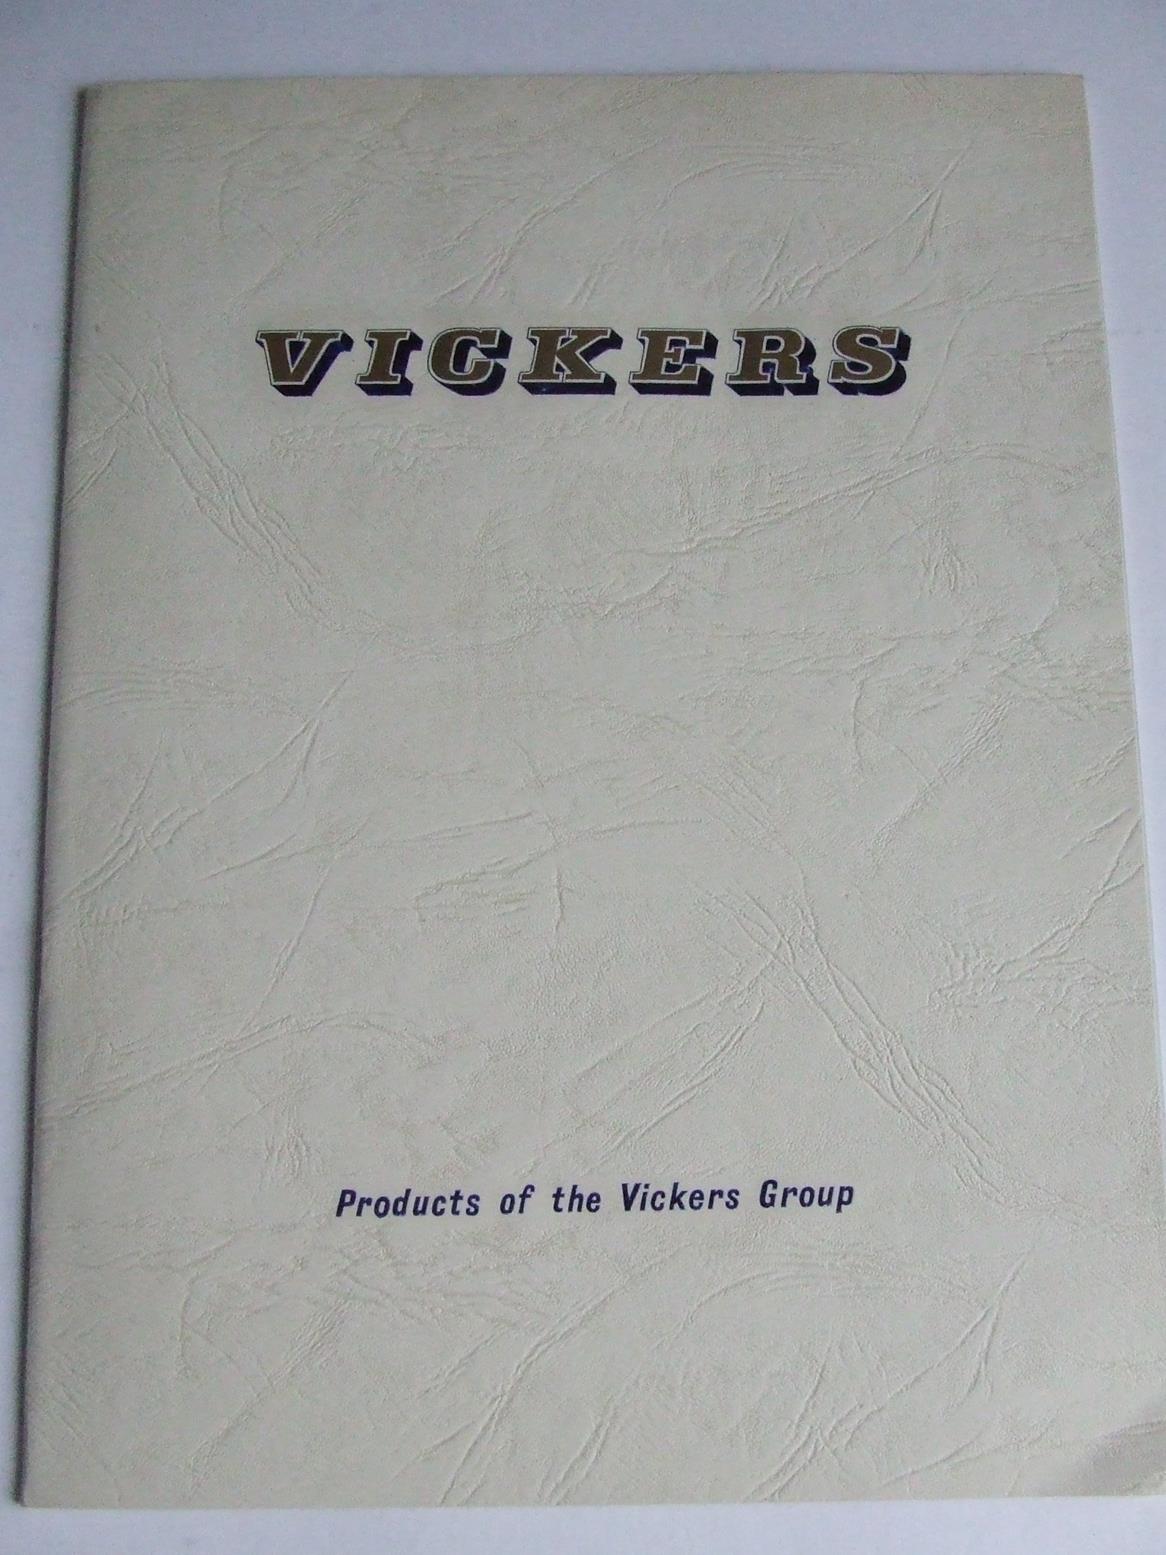 Vickers - Products of the Vickers Group